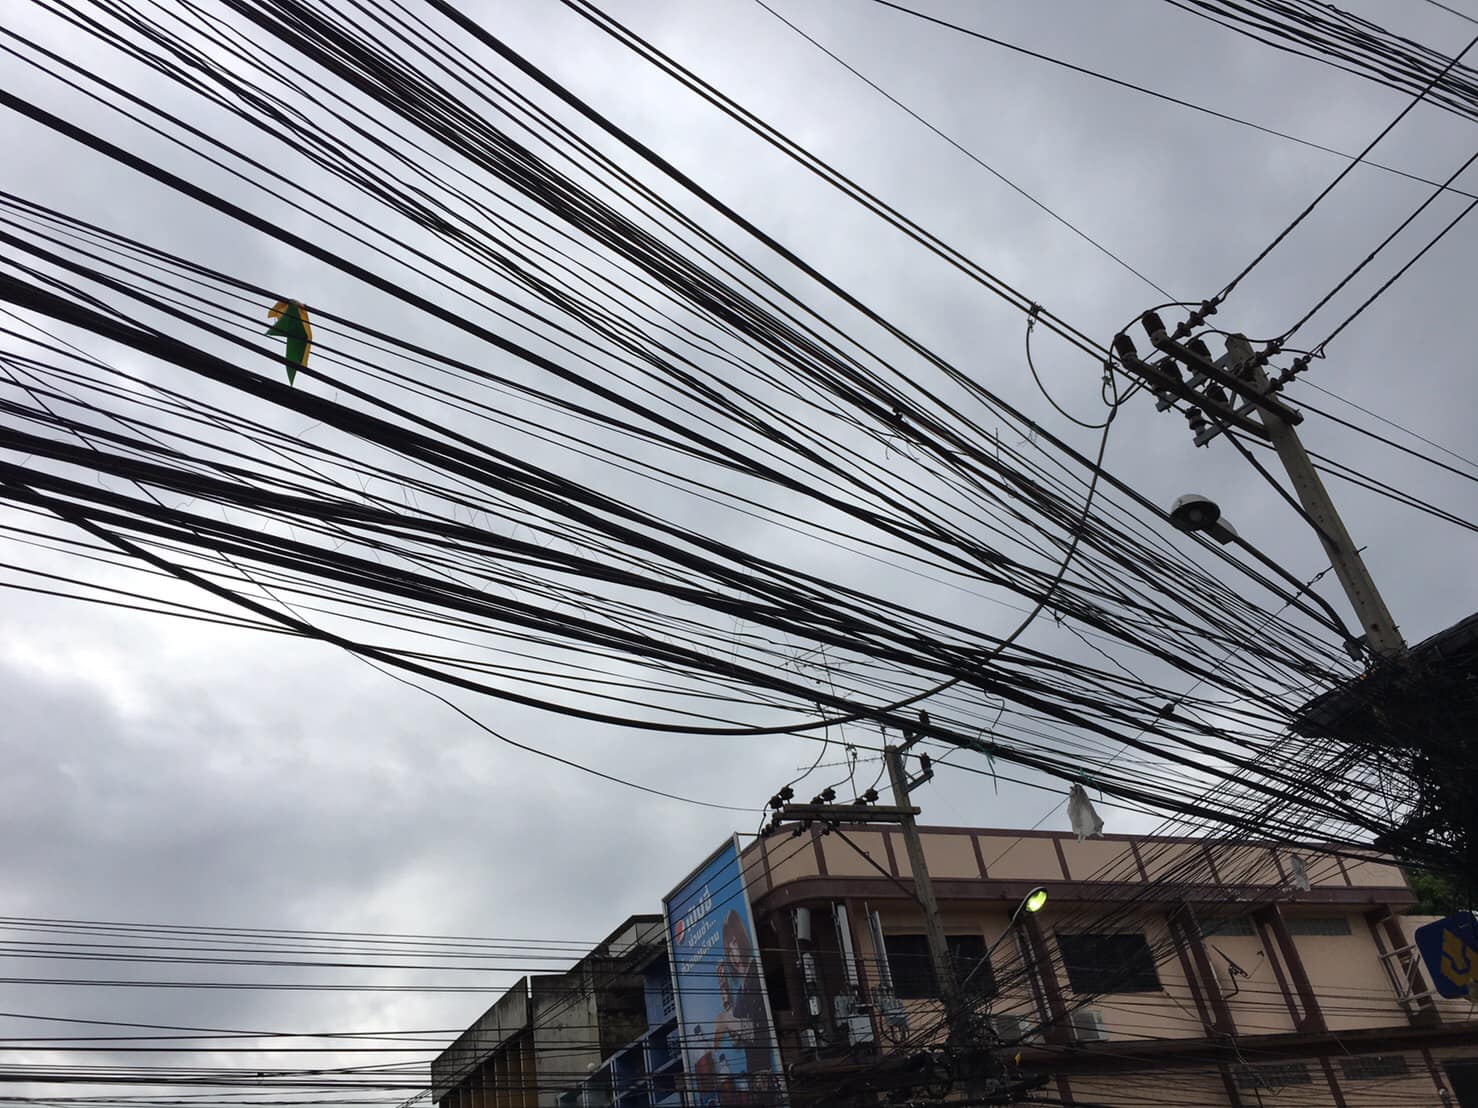 The cable where the incident occurred. Photo: Ester Chill / Facebook 